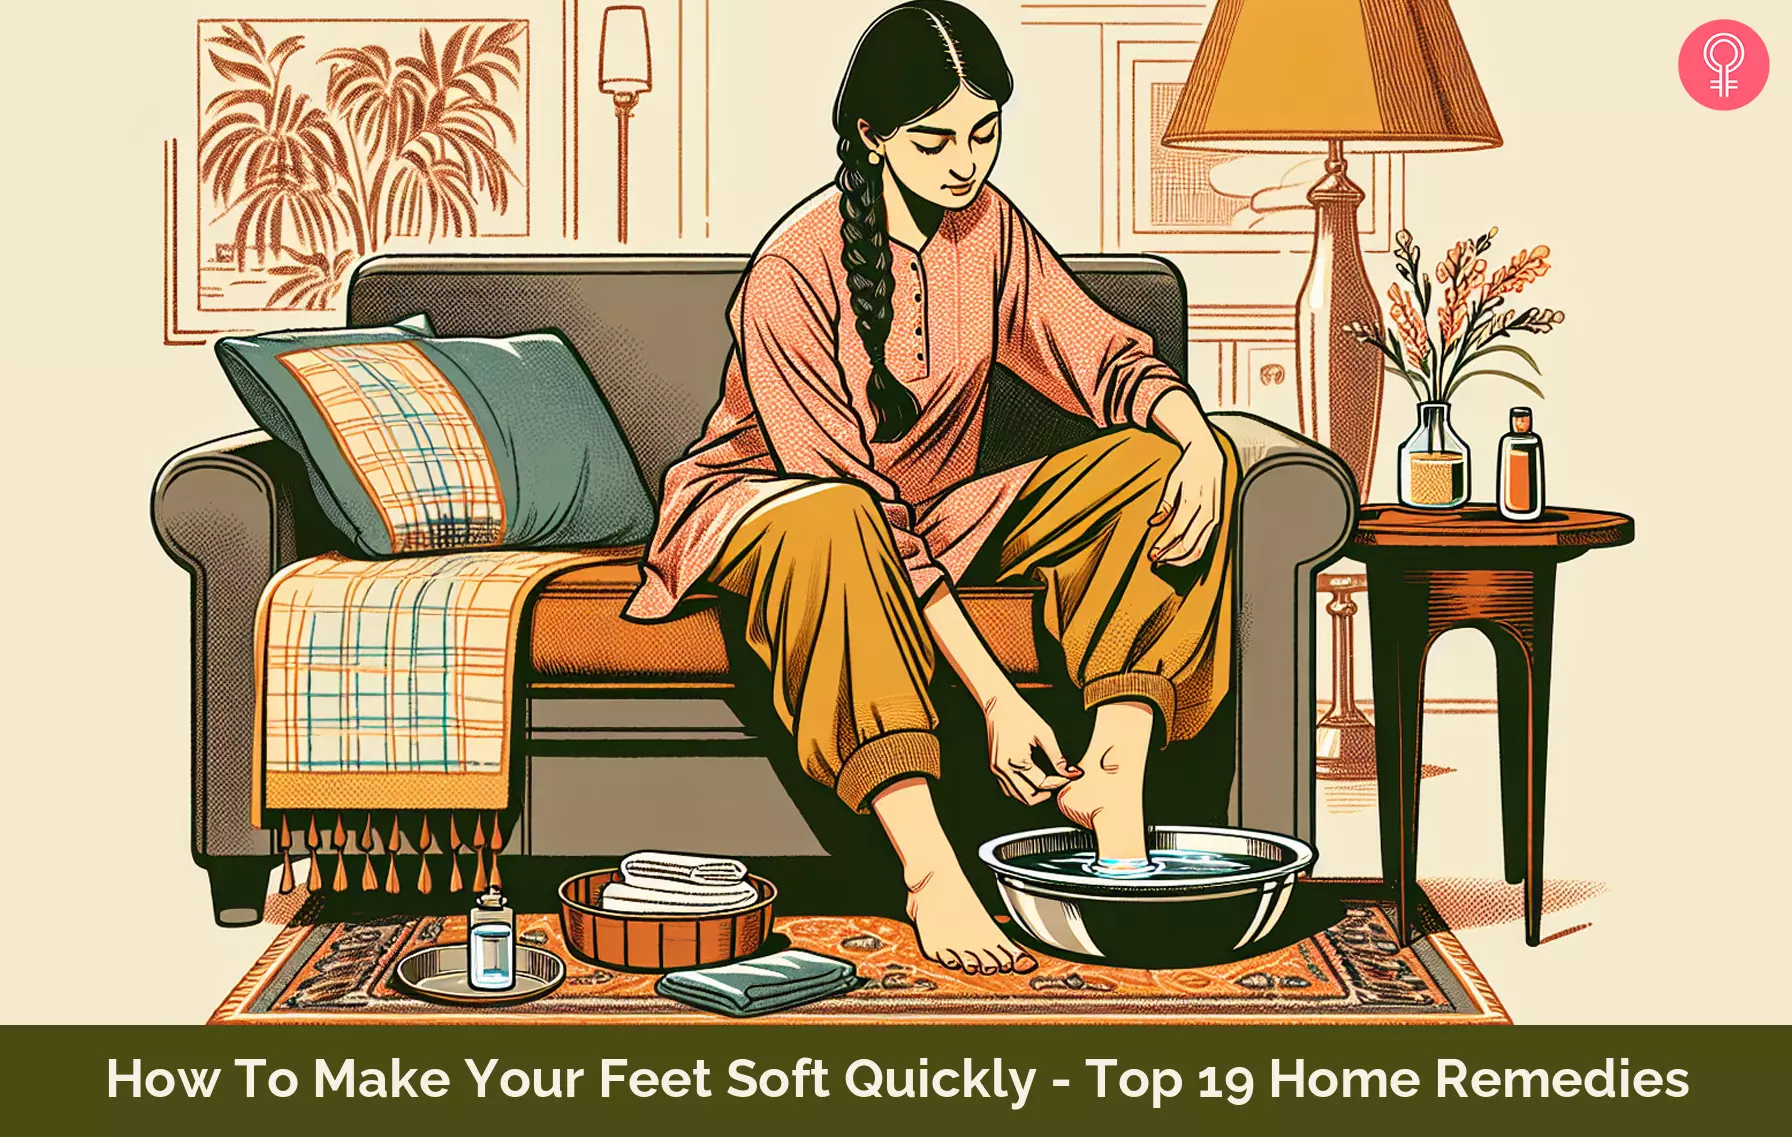 How To Make Your Feet Soft Quickly - Top 19 Home Remedies